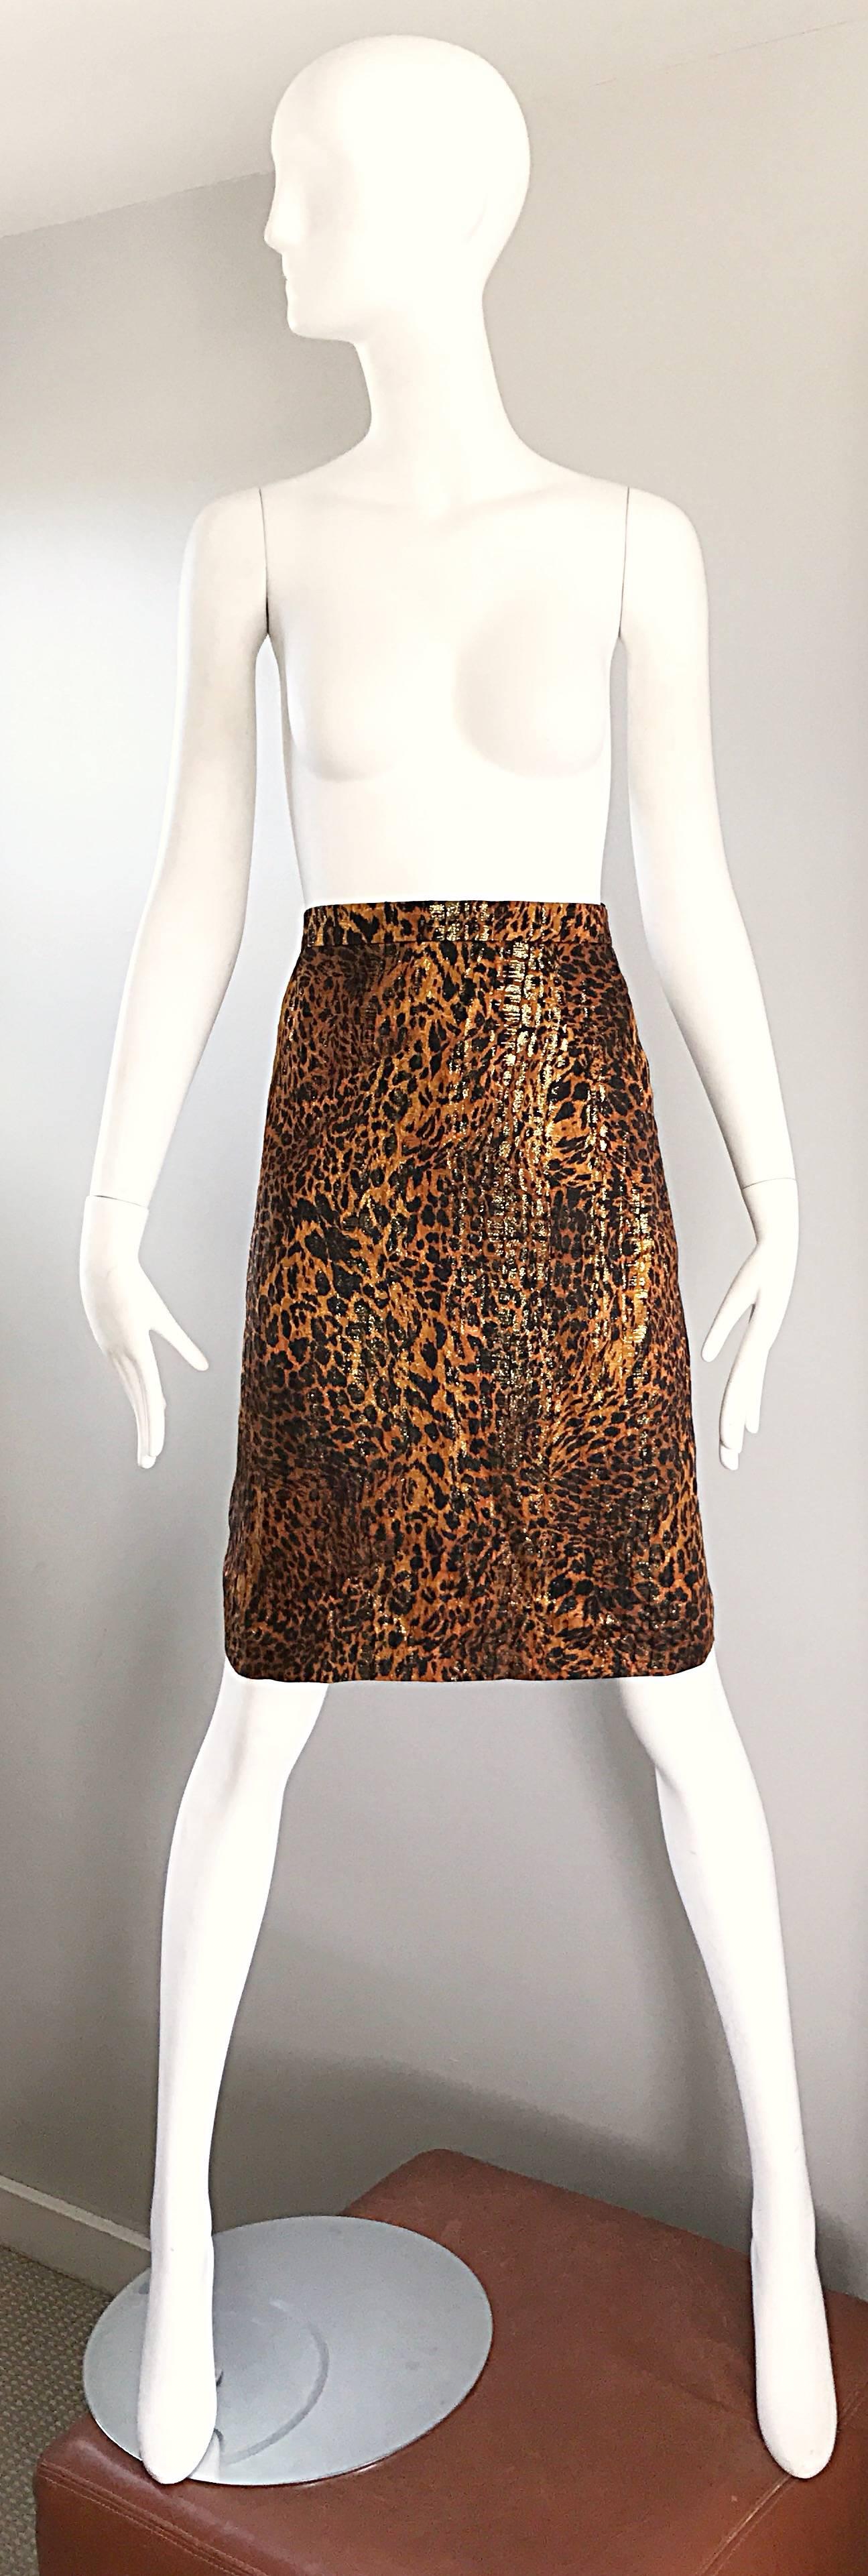 Classic with an edge 1990s / 90 ESCADA, by MARGARETHA LEY metallic leopard / cheetah print + gold metallic silk pencil skirt! Slimming high waisted fit, with heavy attention to detail. Hidden zipper up the back with hook-and-eye closure. Can easily